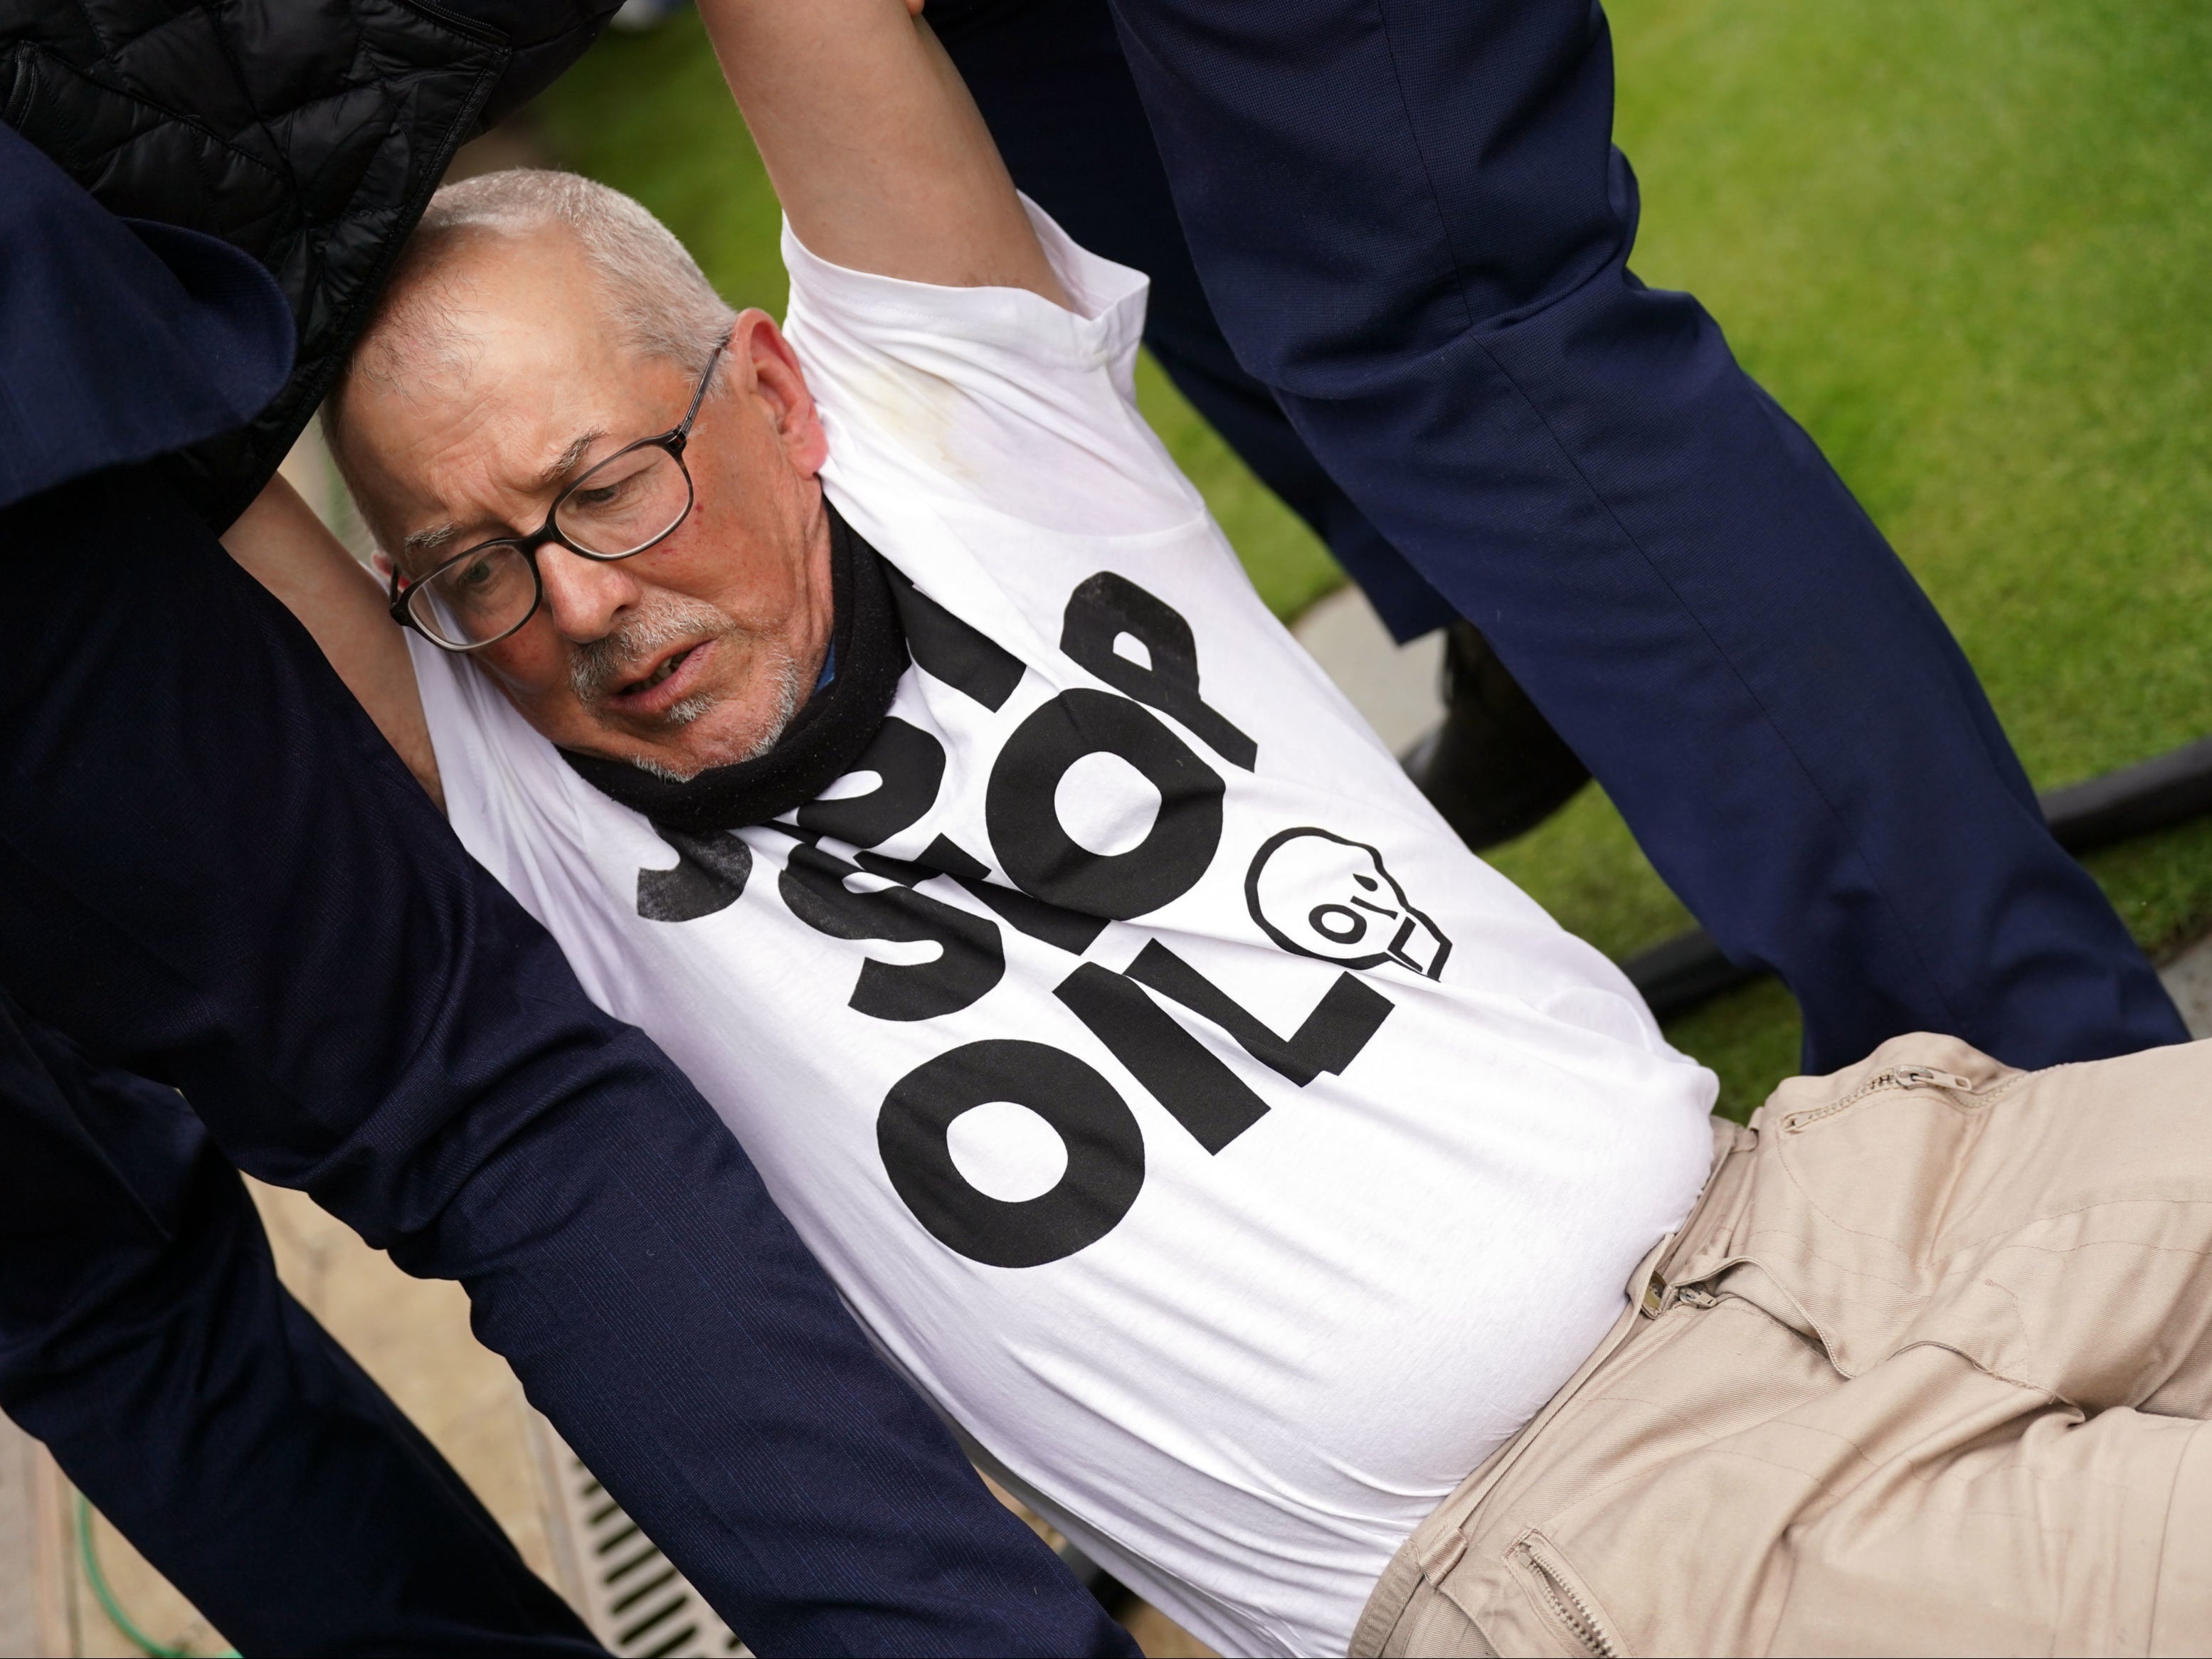 A Just Stop Oil protester is carried off court